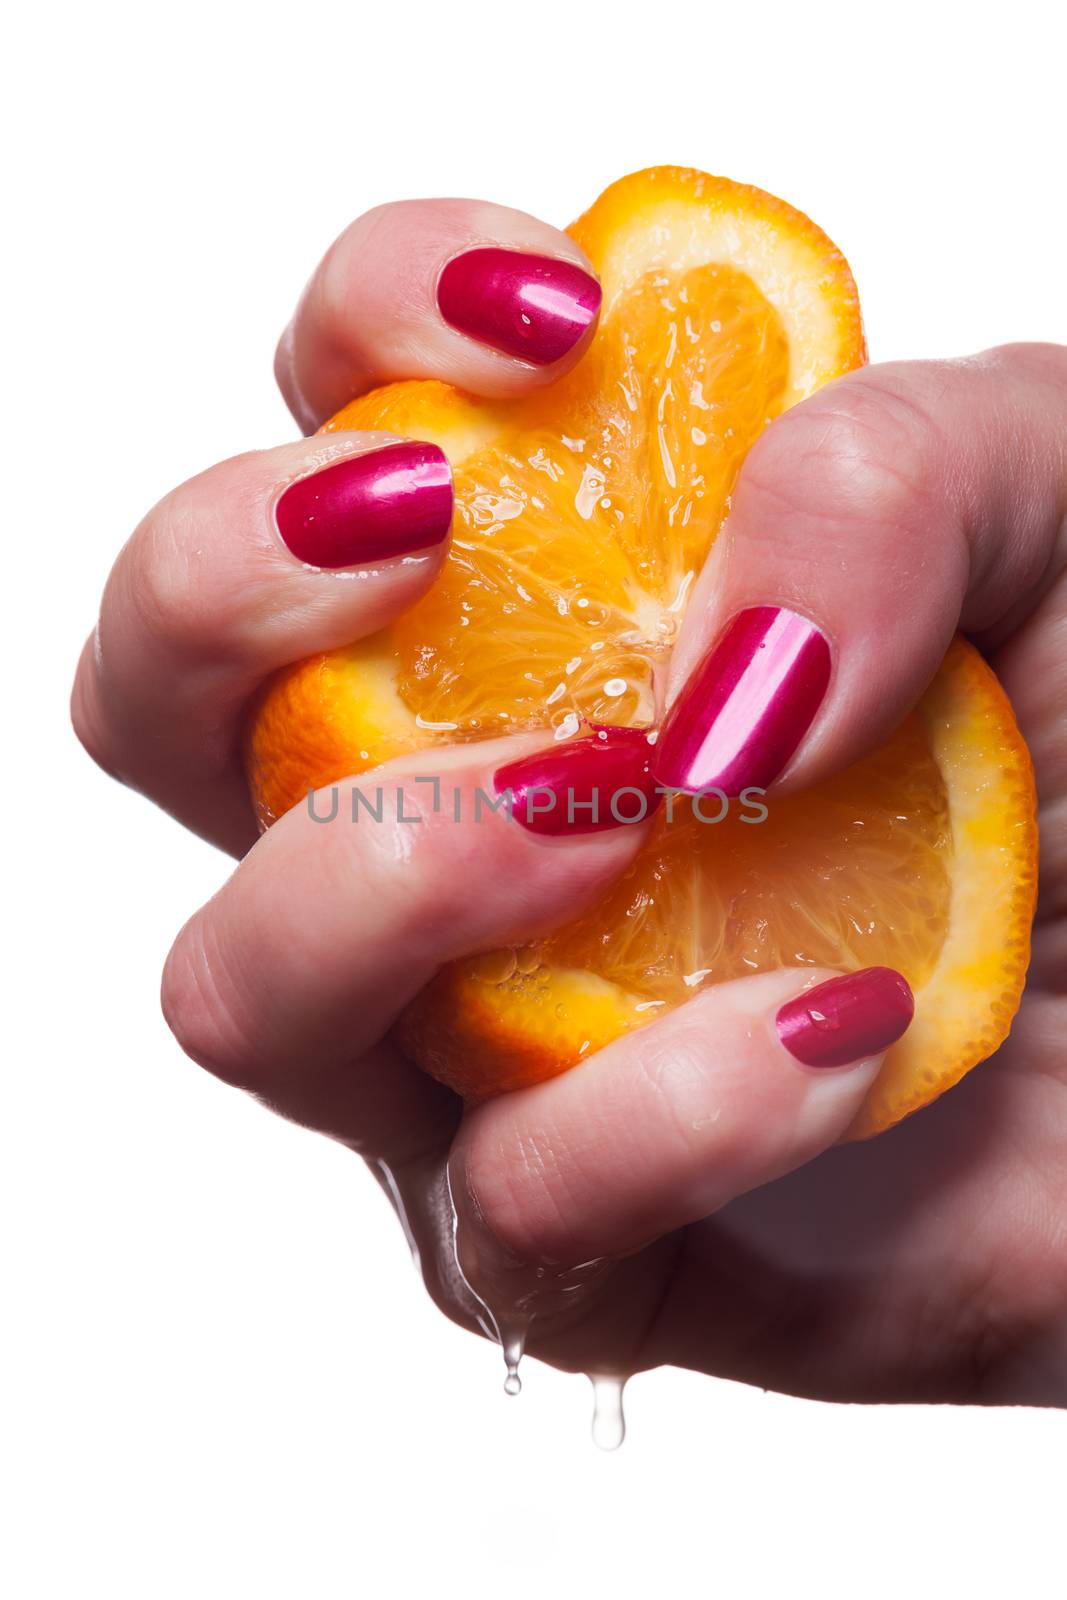 Hand with manicured nails painted a deep glossy red touch an orange on white background